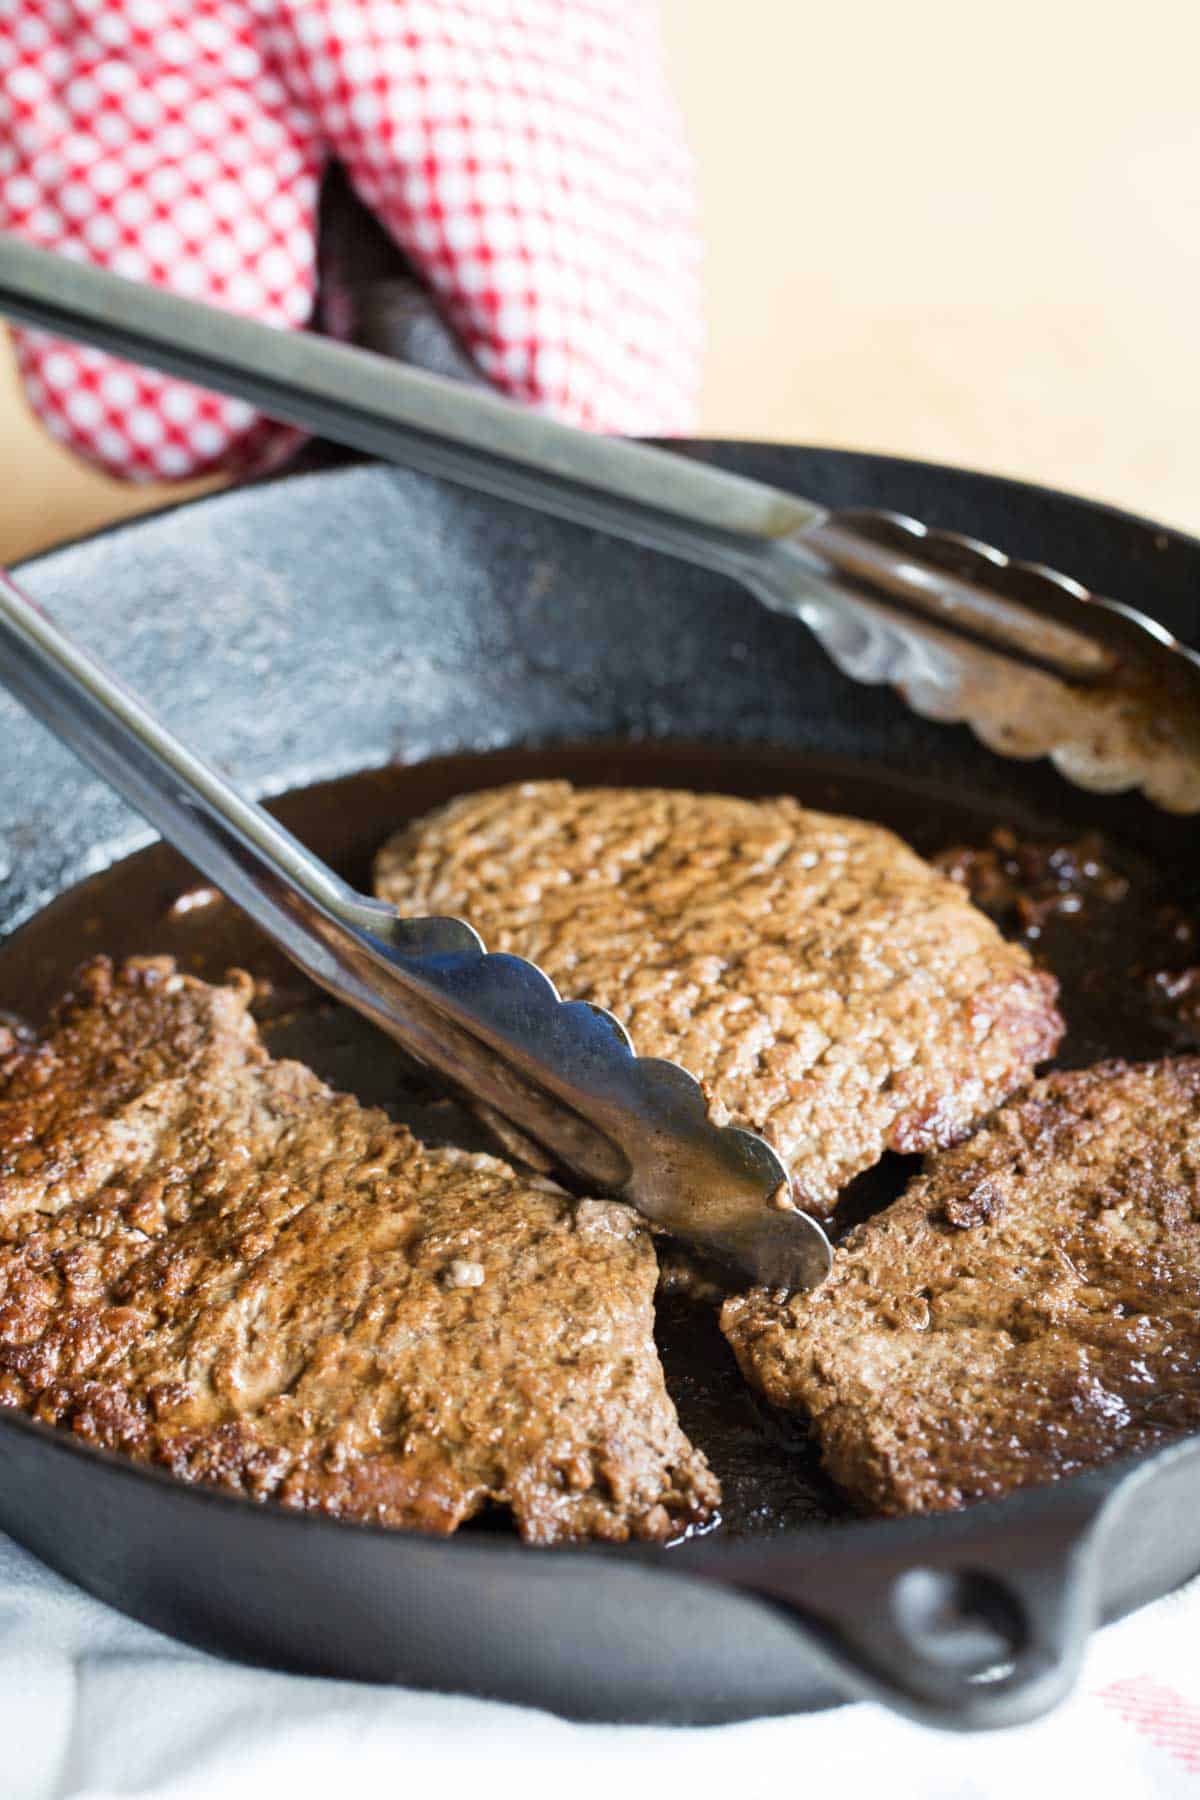 Three cubed steaks in a cast iron skillet with a set of metal tongs.